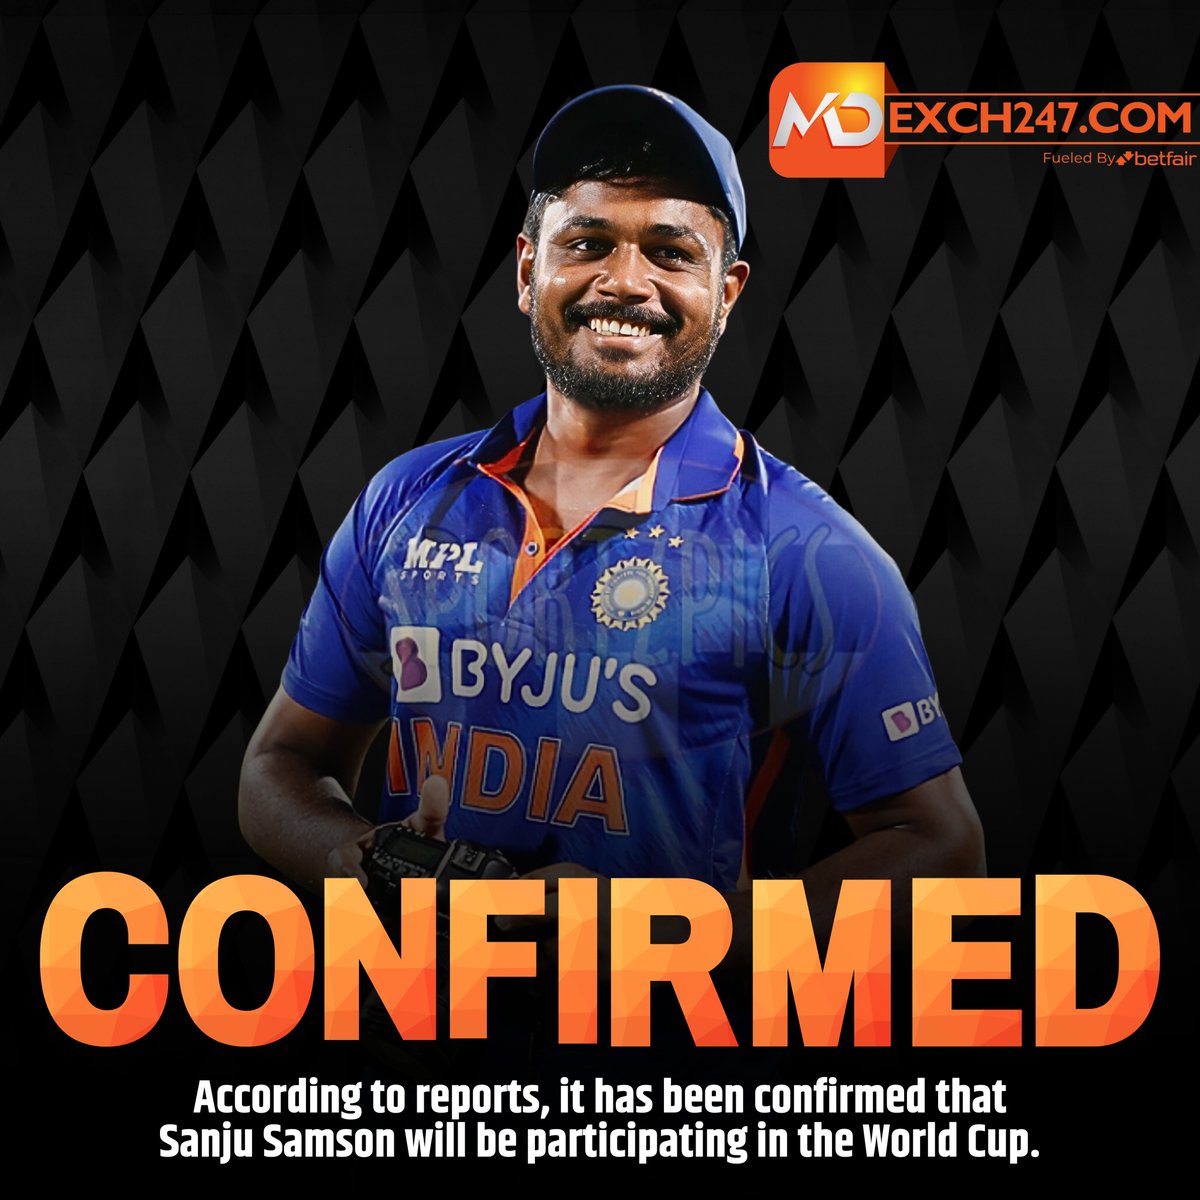 📰✅ Reports confirm that Sanju Samson is set to join the World Cup squad! 🌍🏆 His inclusion adds excitement and anticipation to the upcoming tournament. 🤩🏏 Fans can't wait to see his skills on the global stage. Let the World Cup fever begin! 🙌🎉 #SanjuSamson #worldcup2023